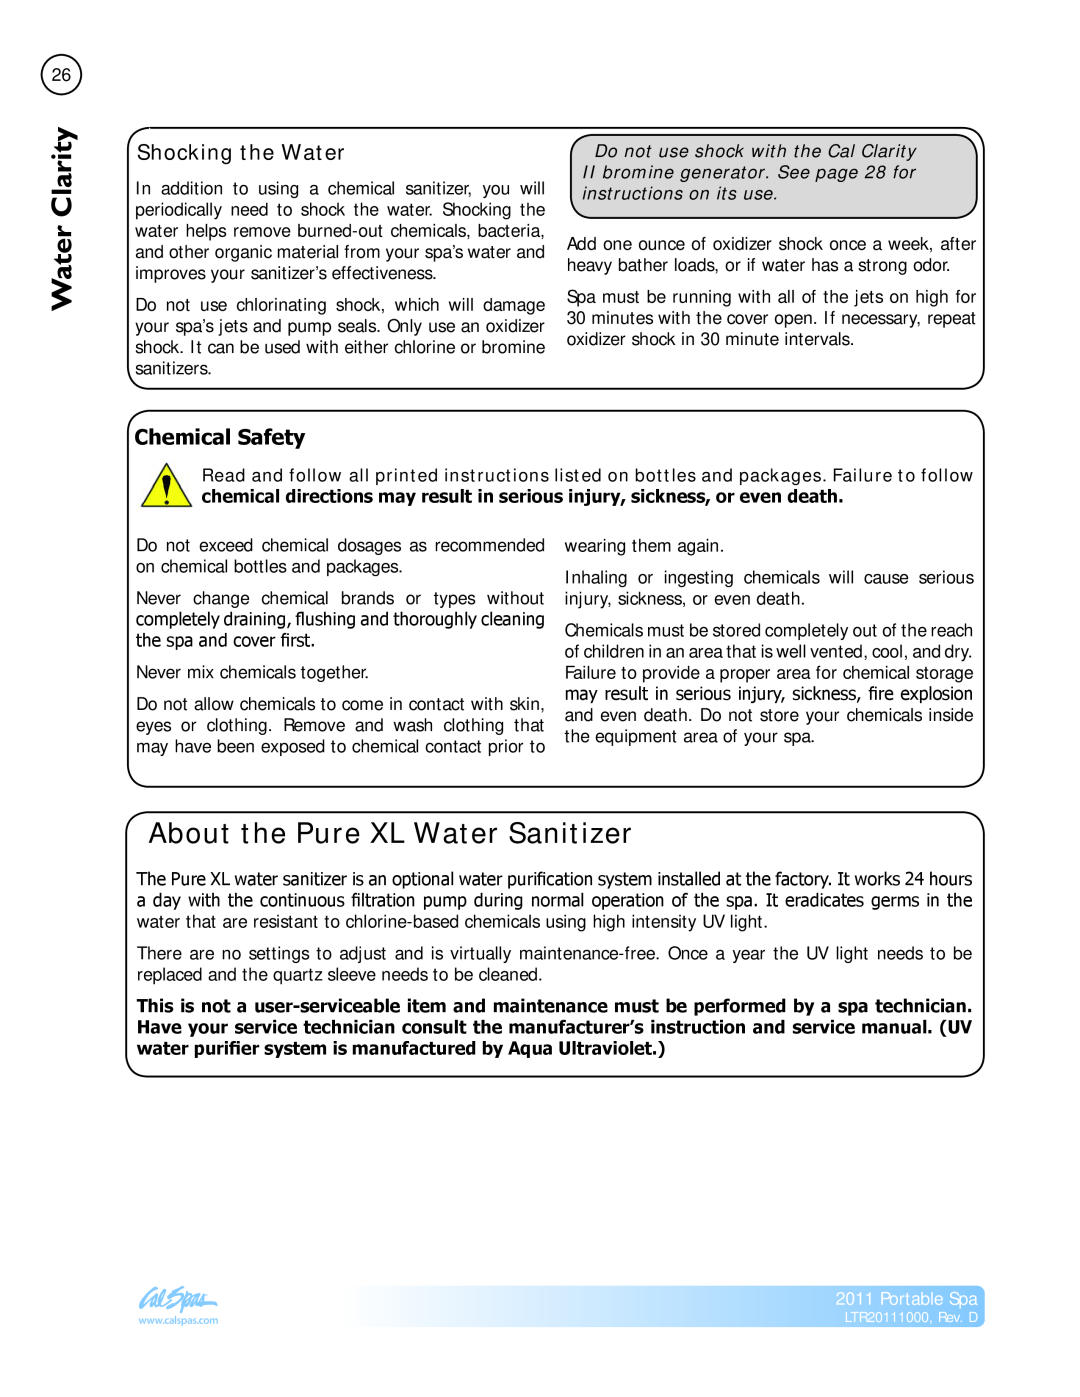 Cal Spas LTR20111000 manual About the Pure XL Water Sanitizer, Shocking the Water, Chemical Safety, Portable Spa 